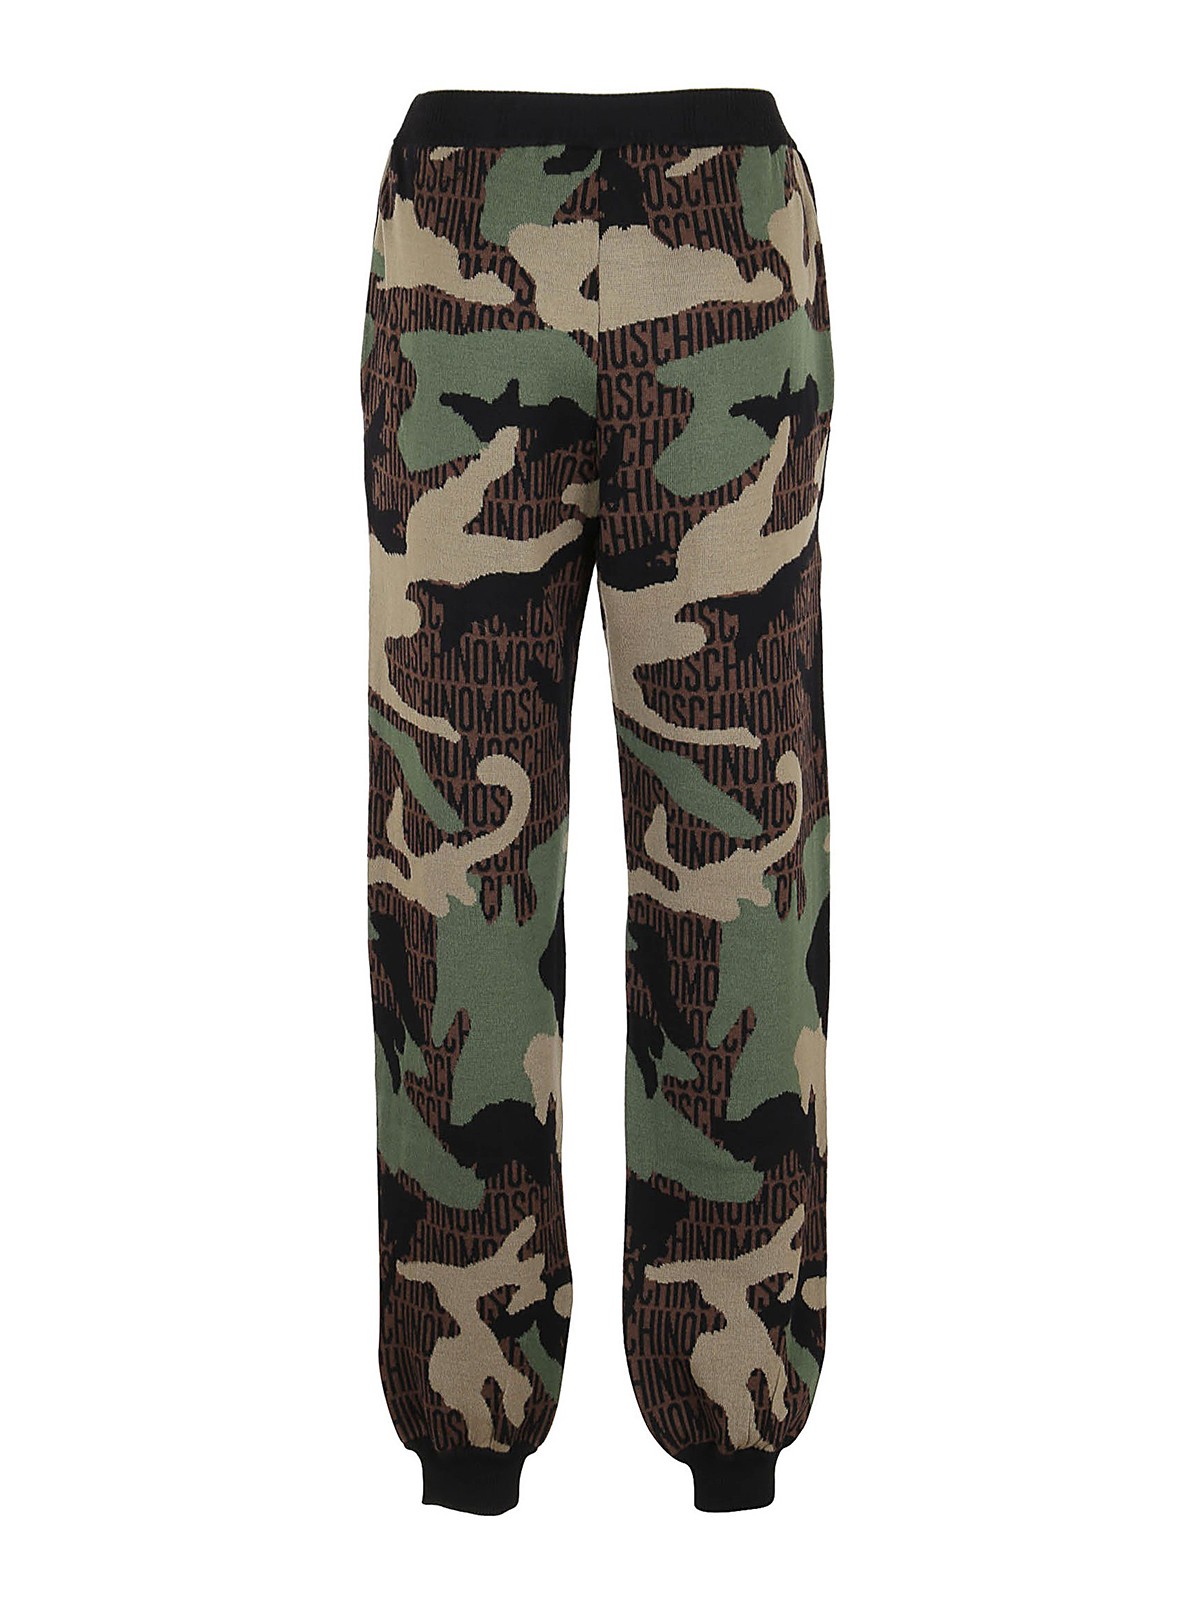 Lost \u0026 Found camouflage pattern joggers 